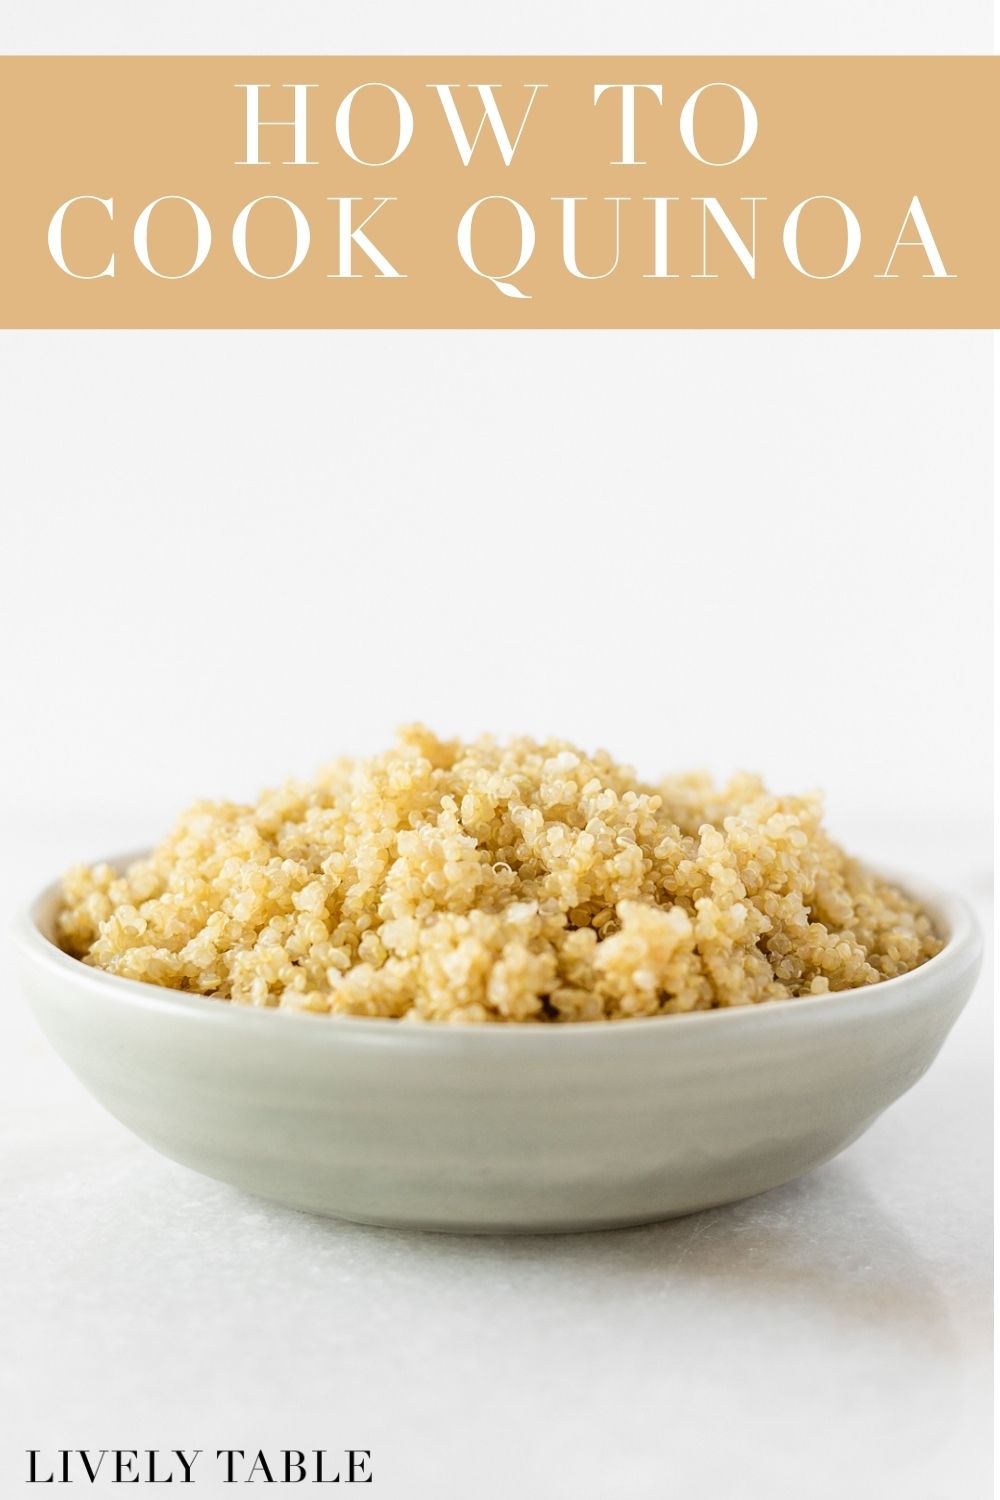 How To Cook Quinoa - Lively Table